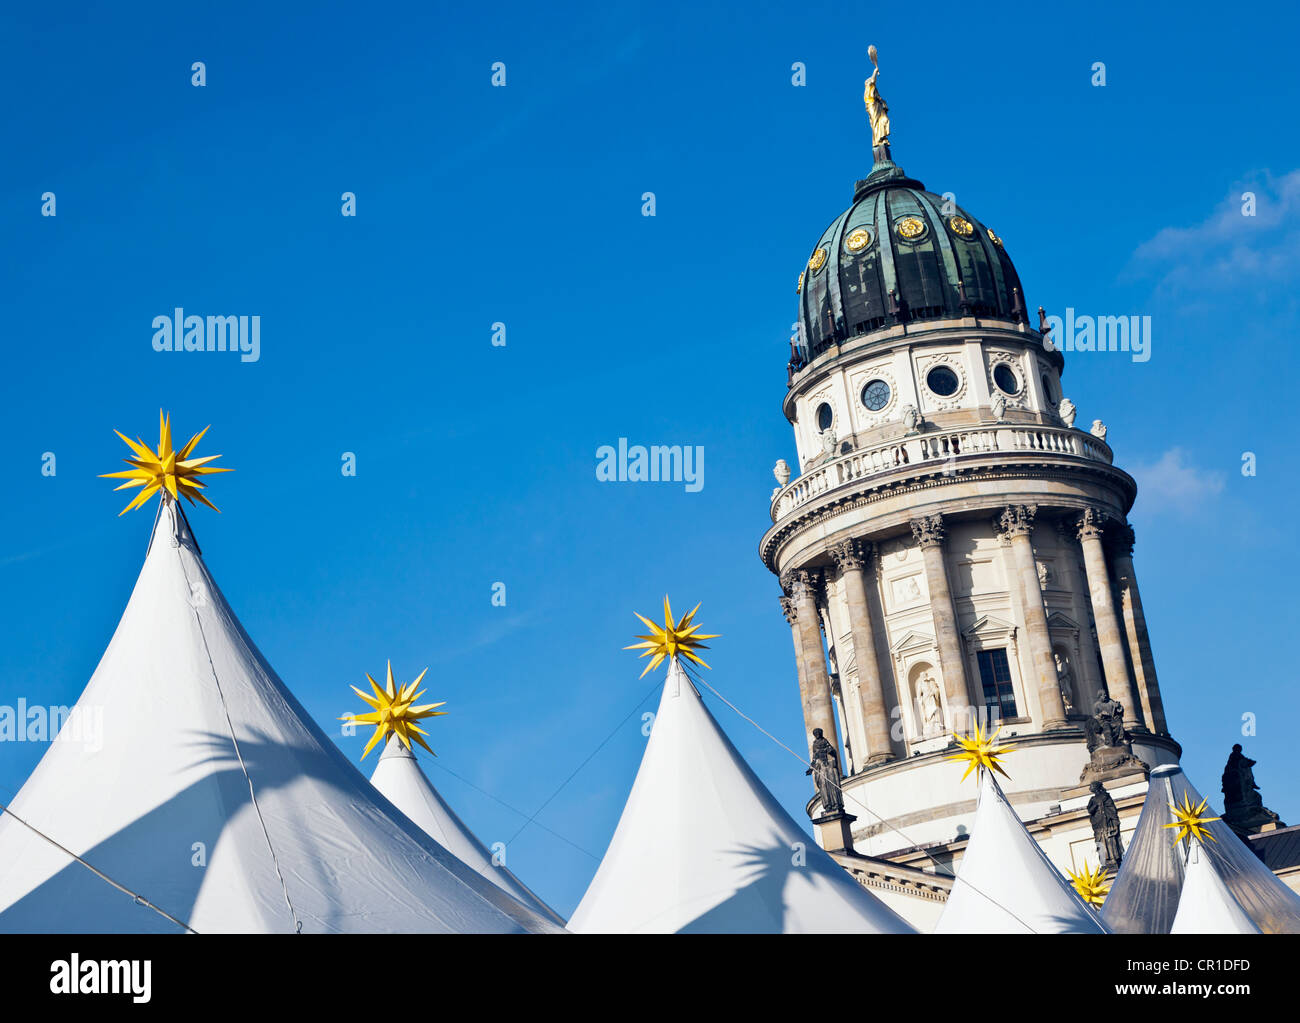 Tops of the tents of the  Christmas Market in front of the Konzerthaus  concert hall on Gendarmenmarkt square, Stock Photo